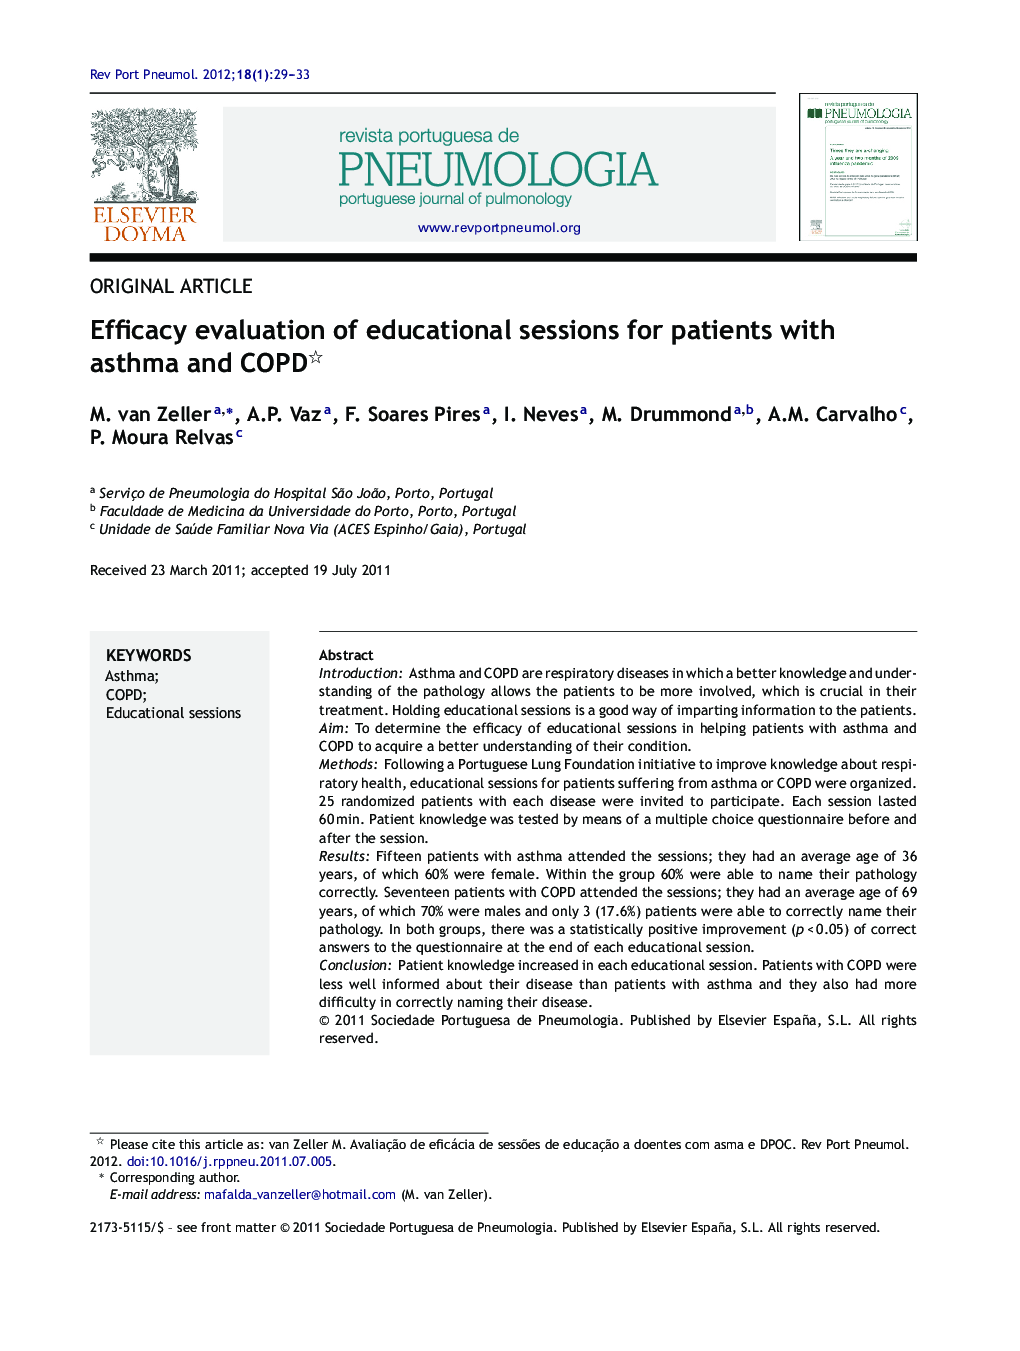 Efficacy evaluation of educational sessions for patients with asthma and COPD 